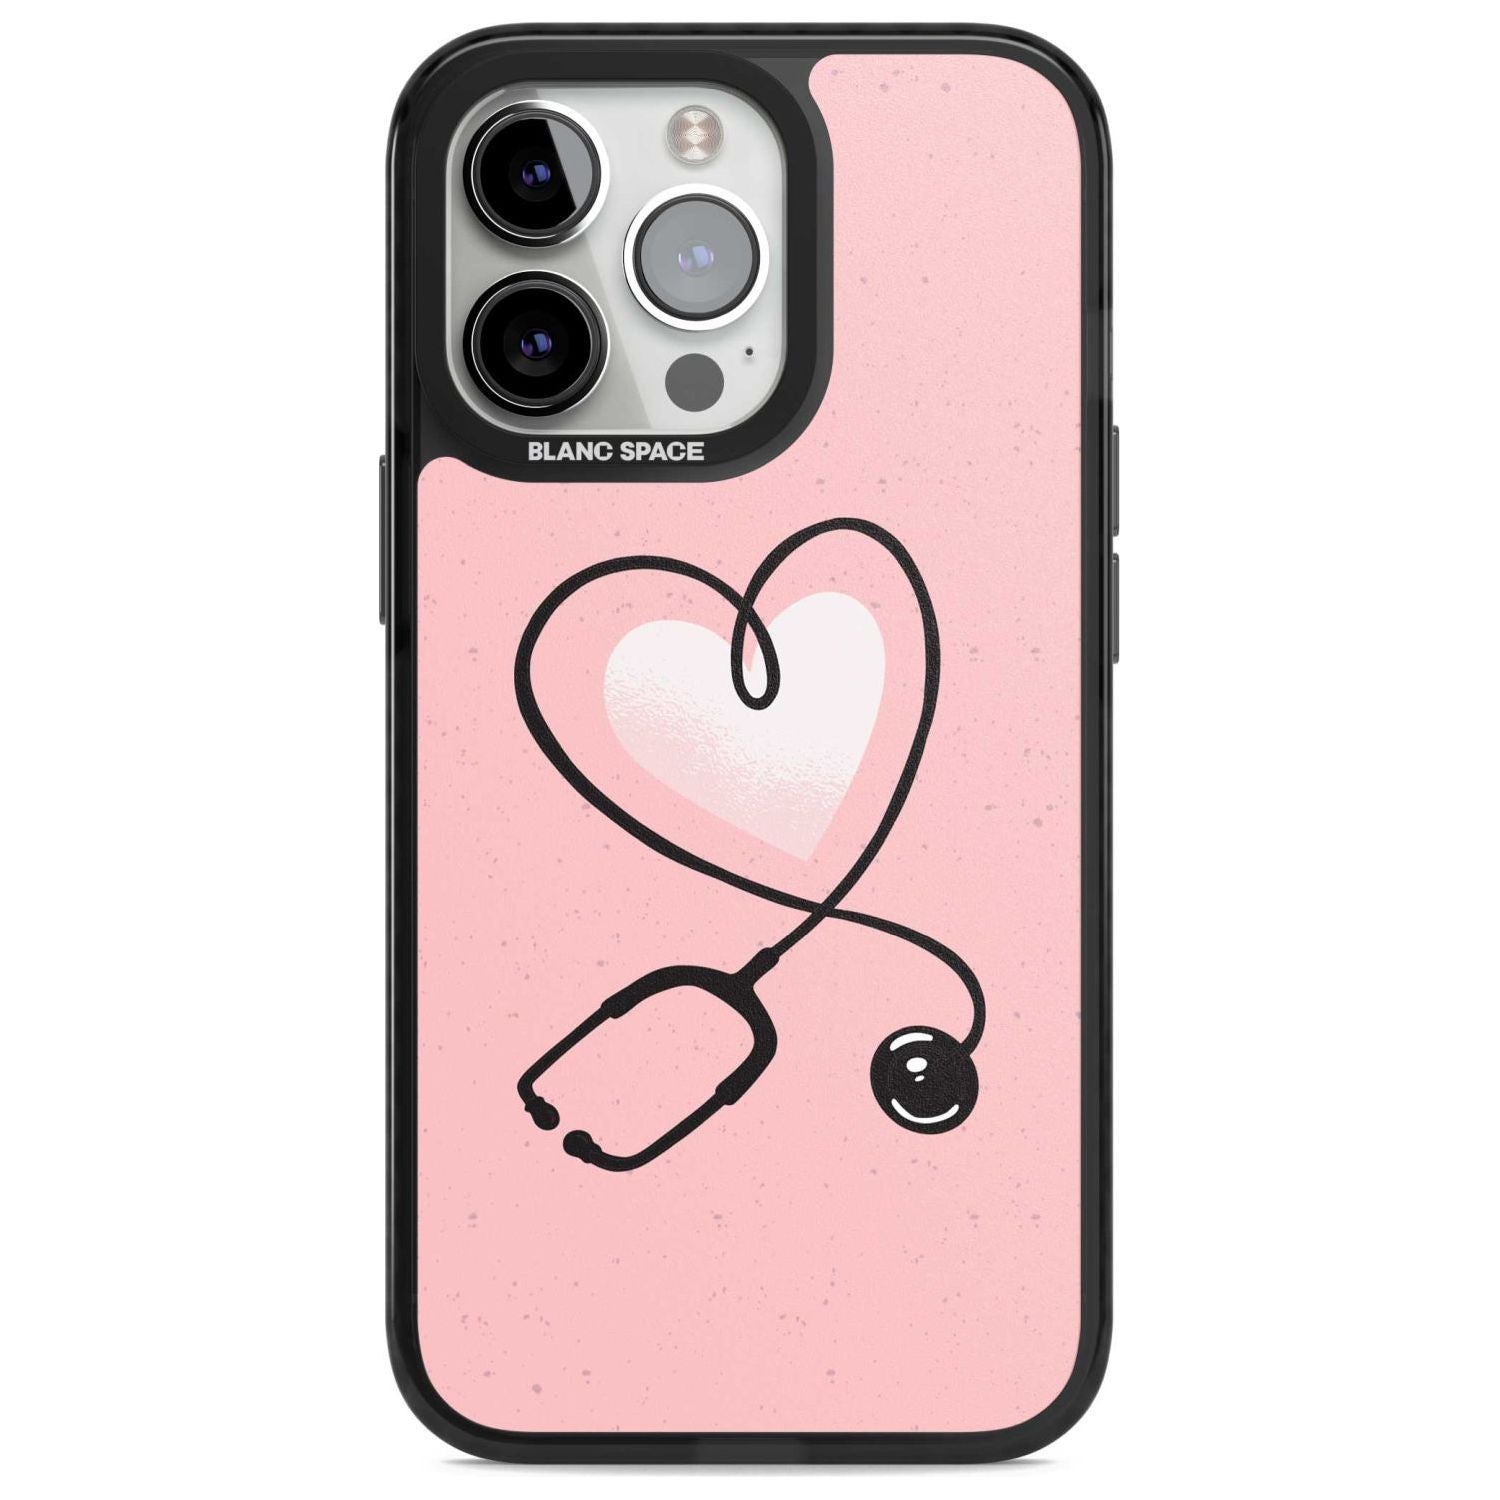 Medical Inspired Design Stethoscope Heart Phone Case iPhone 15 Pro Max / Magsafe Black Impact Case,iPhone 15 Pro / Magsafe Black Impact Case,iPhone 14 Pro Max / Magsafe Black Impact Case,iPhone 14 Pro / Magsafe Black Impact Case,iPhone 13 Pro / Magsafe Black Impact Case Blanc Space